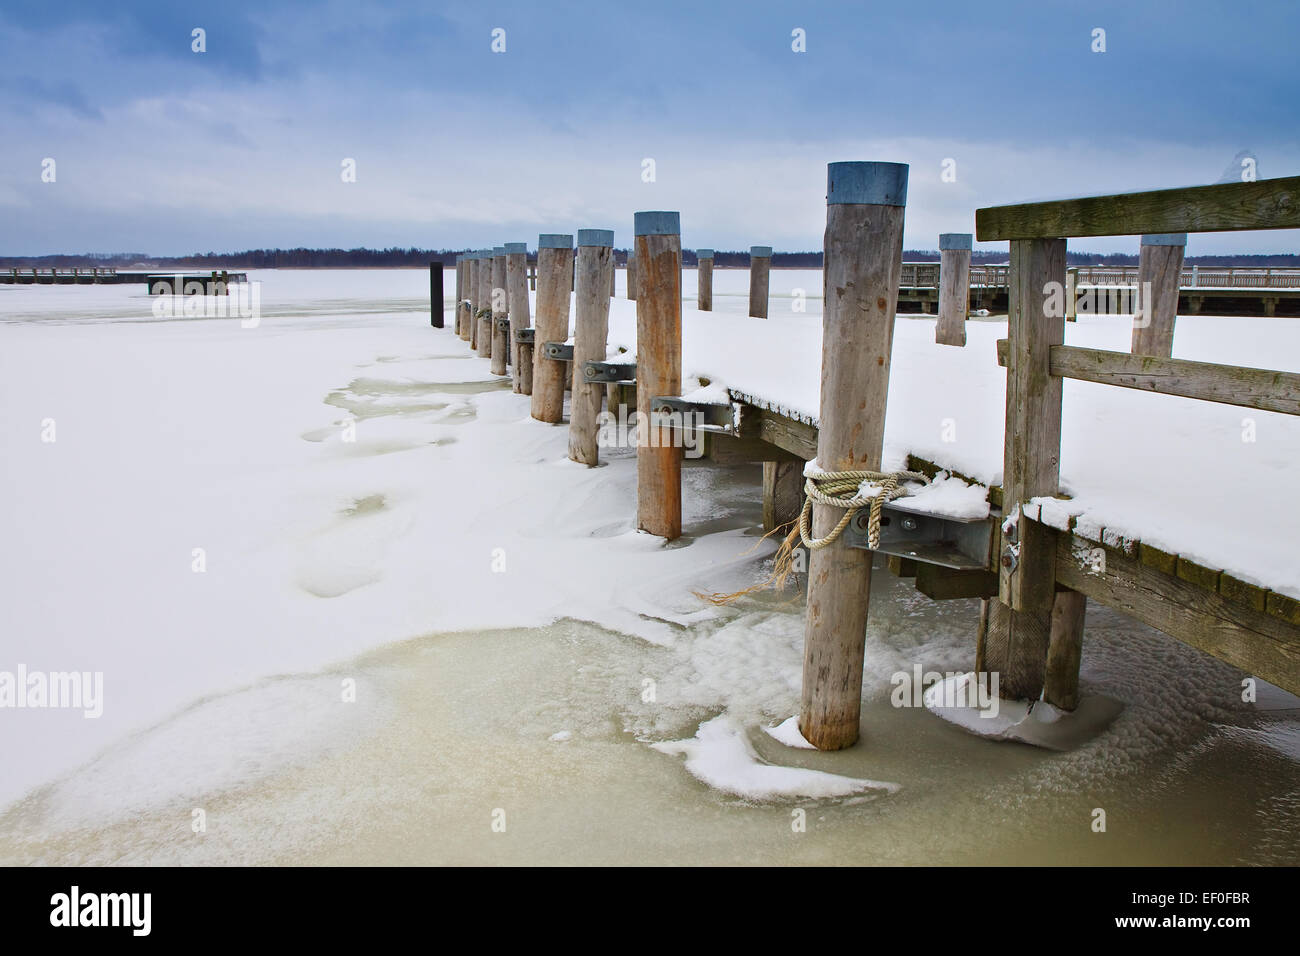 The lagoon in the winter. Stock Photo